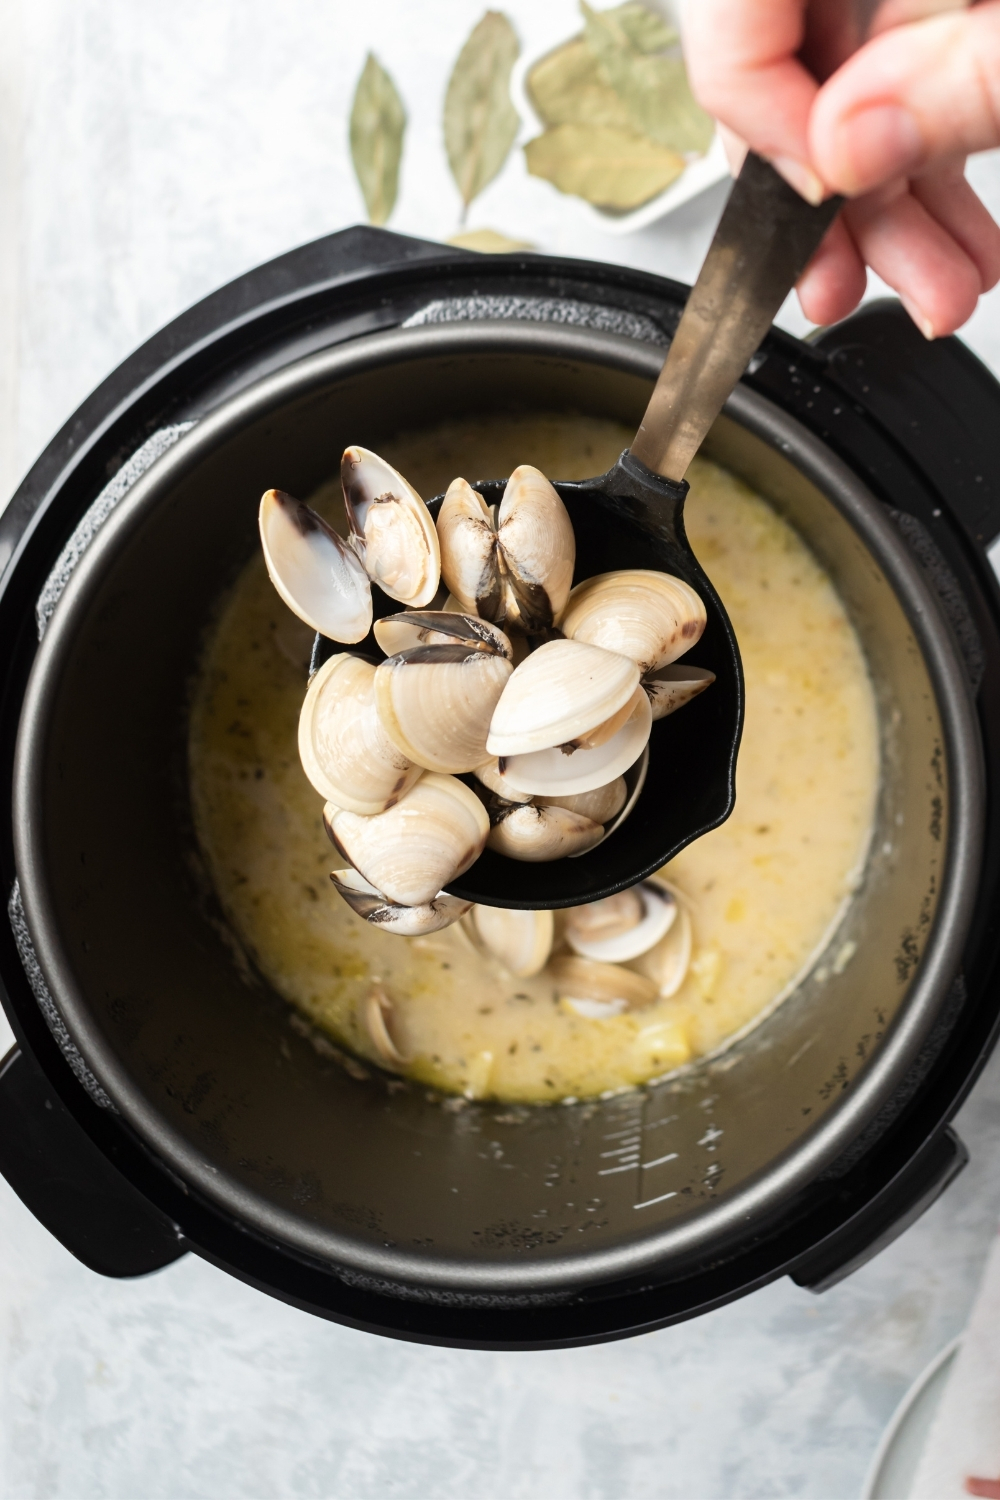 A hand holding a ladle over an instant pot filled with clam chowder.